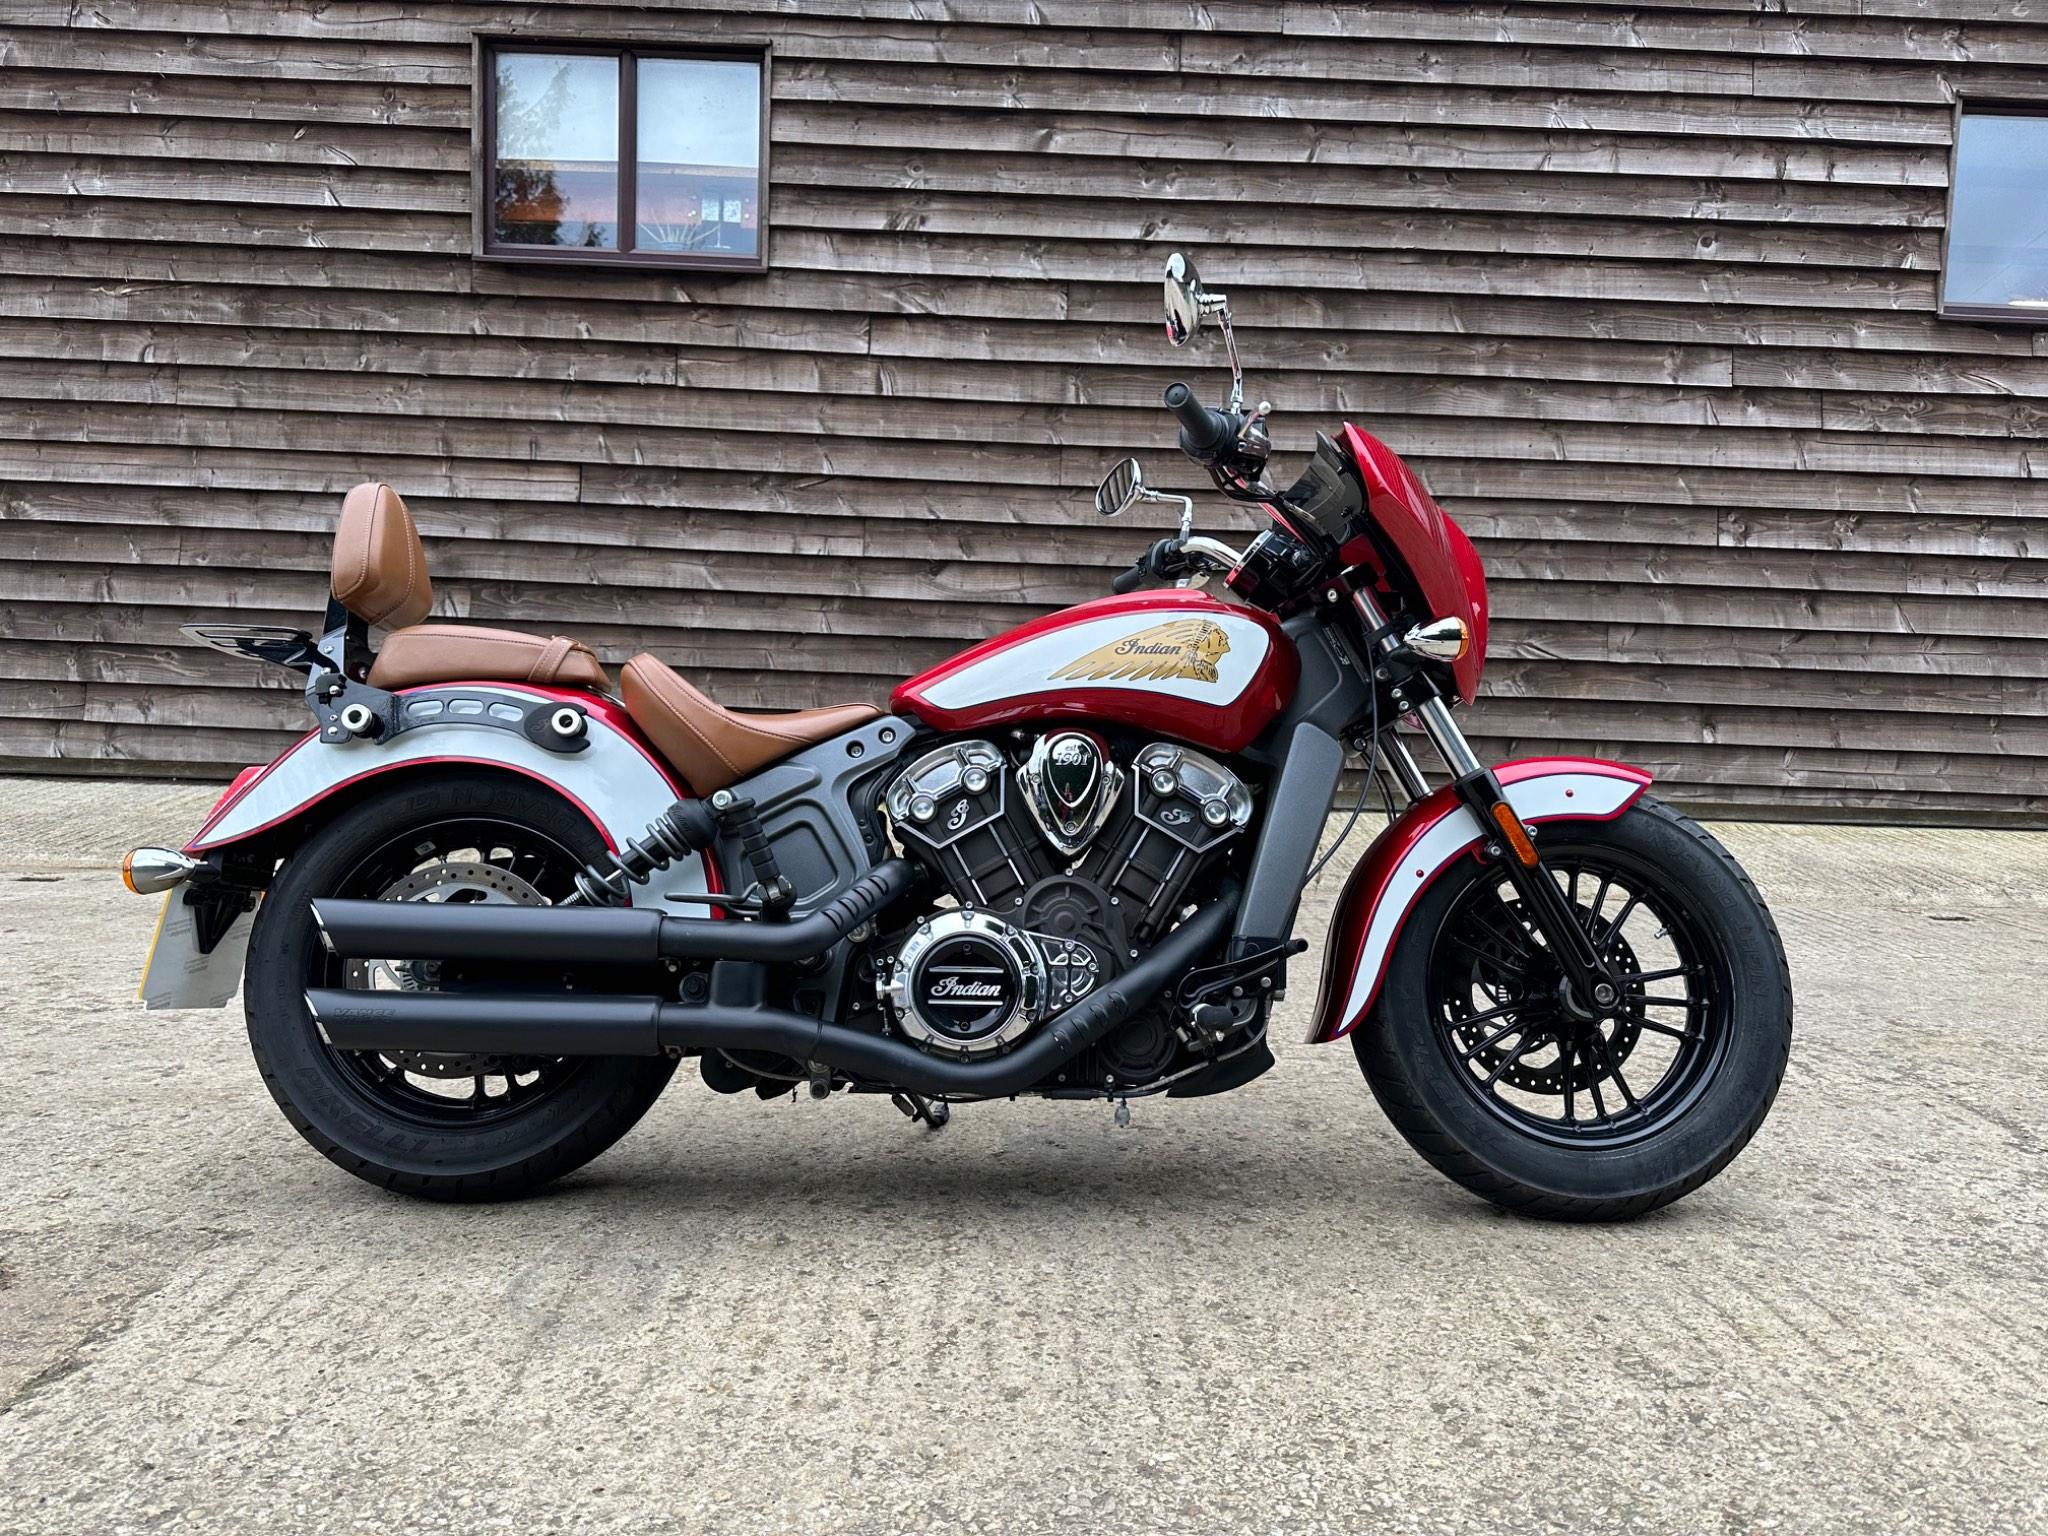 2020 Indian Scout 1133 Scout (Indian Motorcycle Red/Ivory Cream)